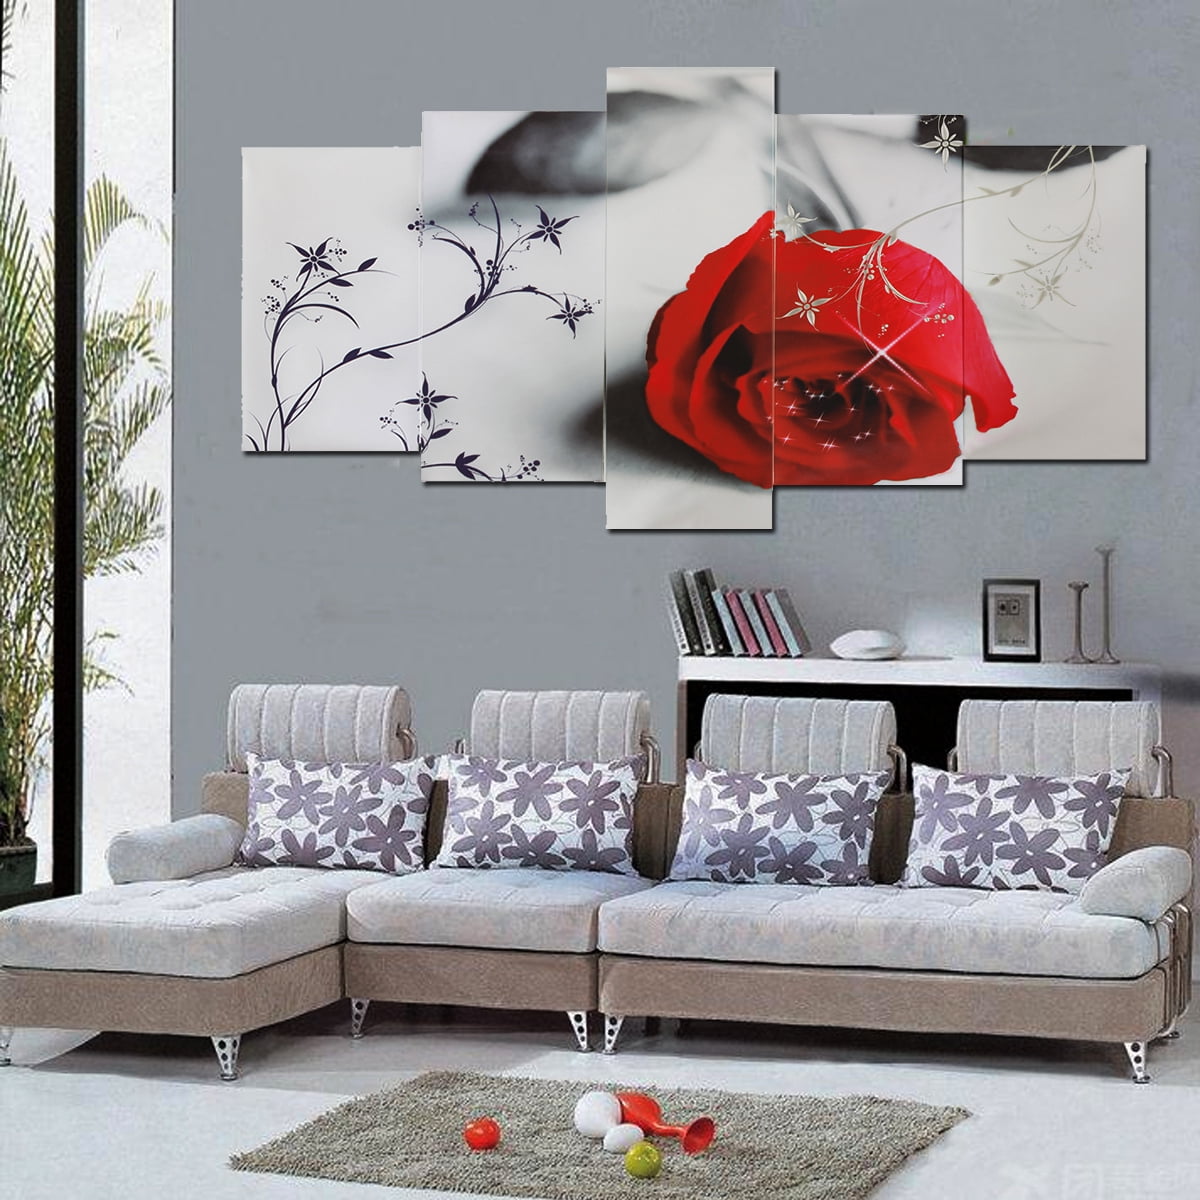 Beautiful Rose Canvas Painting Wall Art Picture Living Room Home Decor